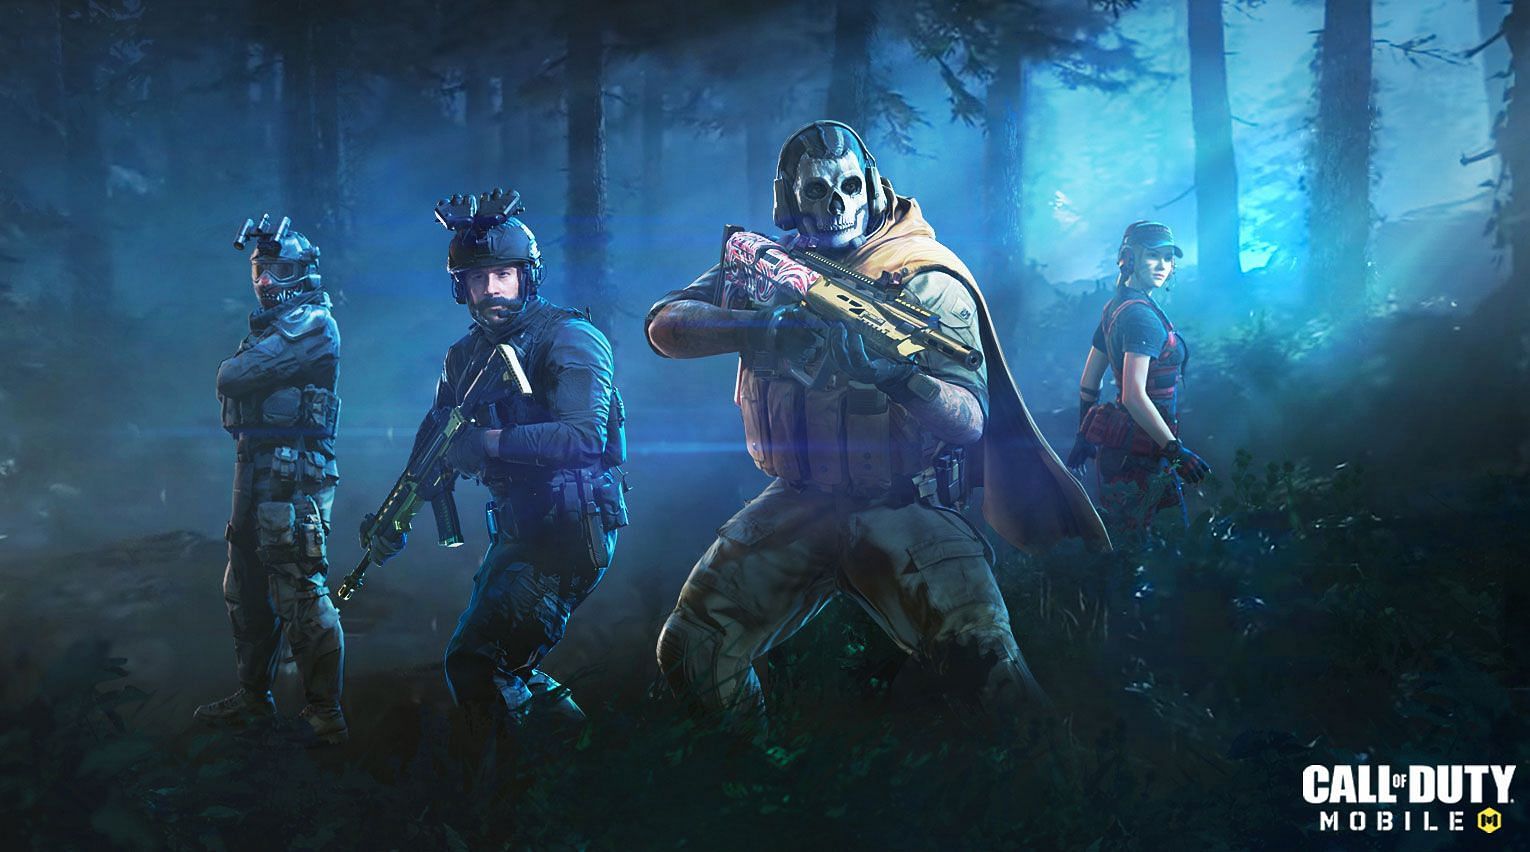 Isolated is going dark as Night mode is coming to the map later this season to celebrate Halloween in COD Mobile (Image via Activision)